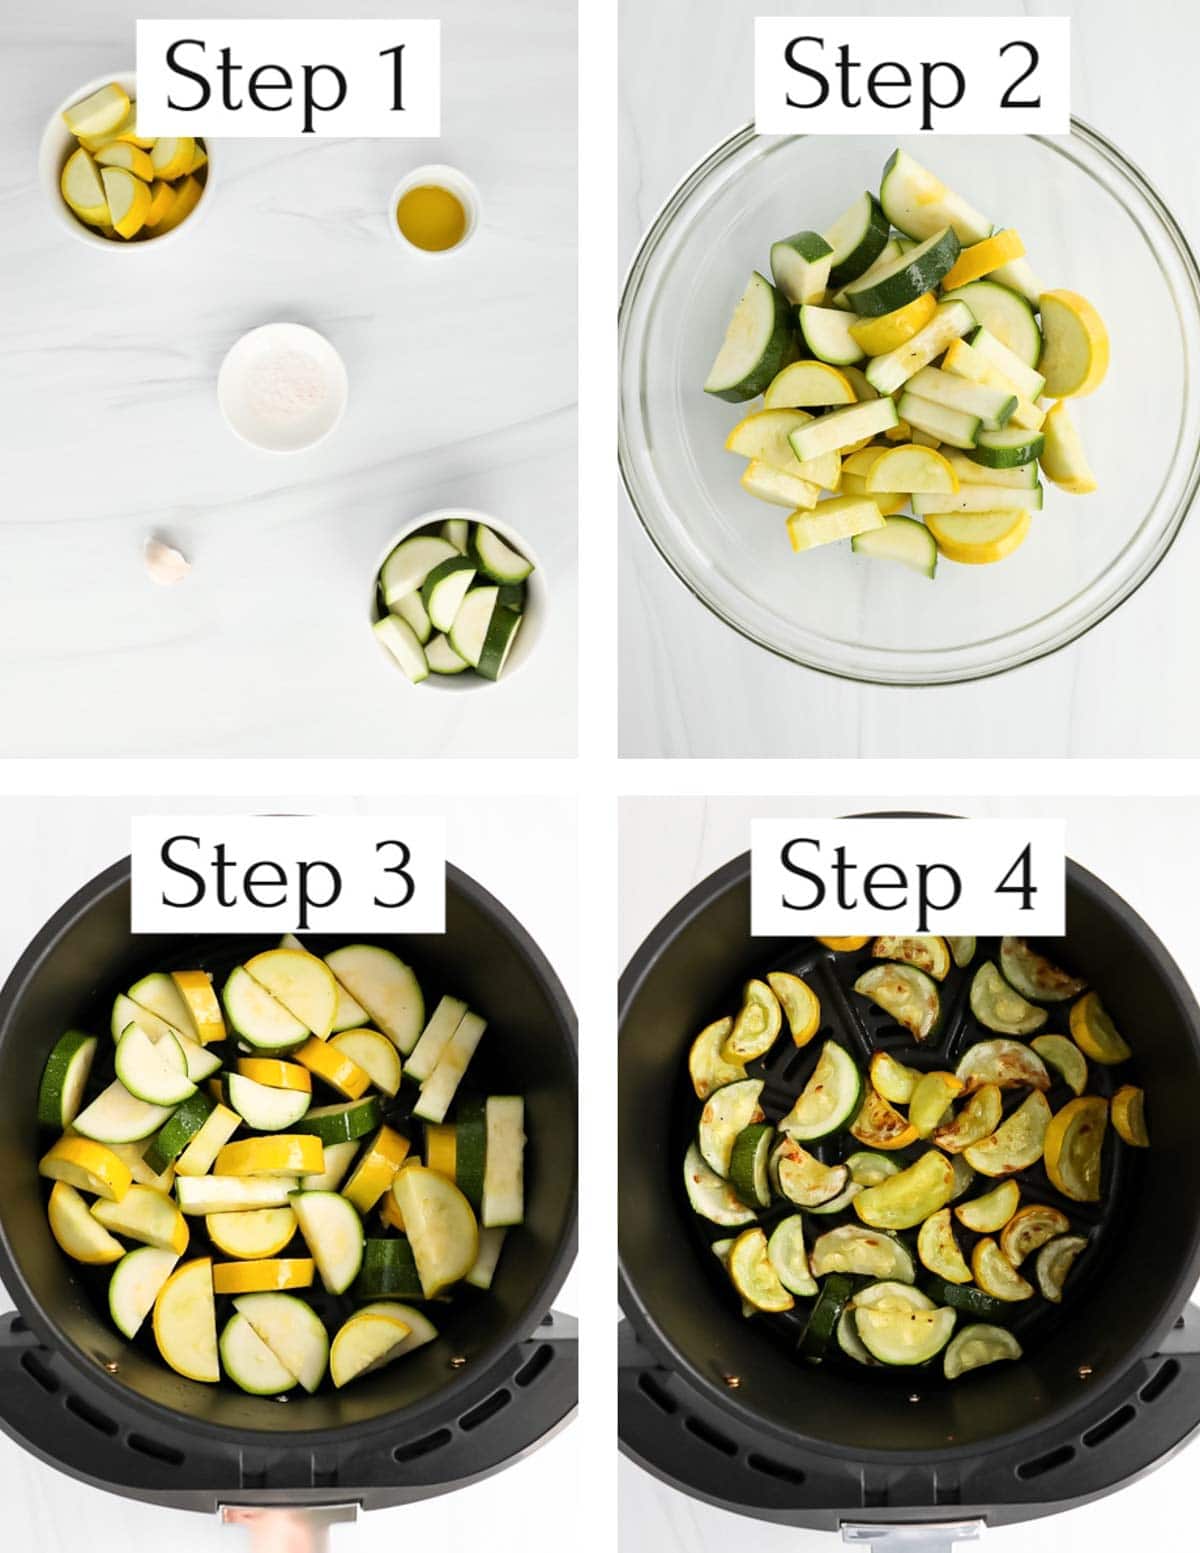 Four images labeled step 1-step 4. Image 1/step 1 is a picture of ingredients in small white bowls, step 2: yellow and zucchini squash in a clear bowl, step 3: the squash inside an air fryer, step 4: the squash cooked inside an air fryer.